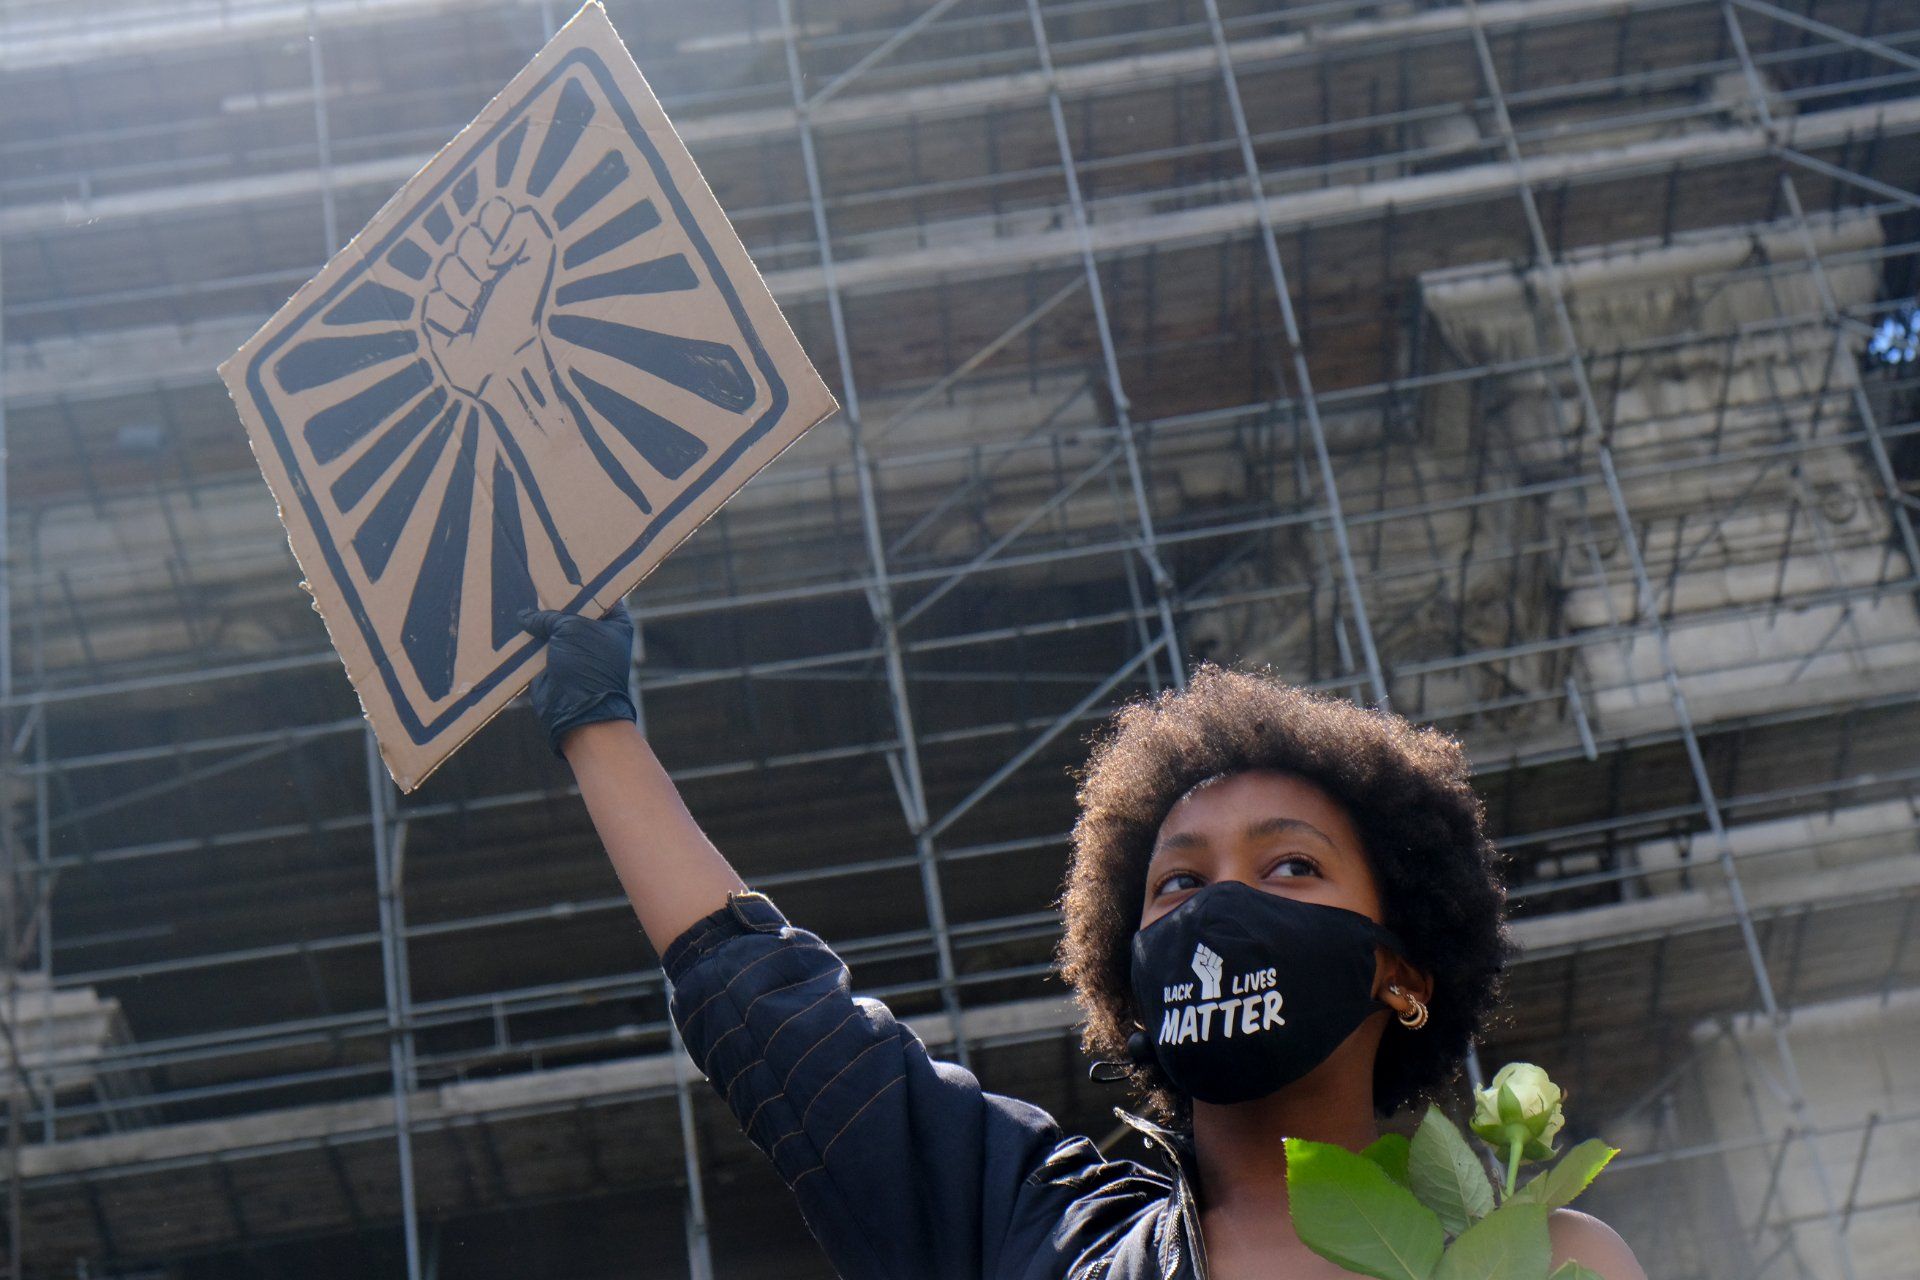 A female protester wears a "black lives matter" face mask and holds a fist sign - Black Lives Matter